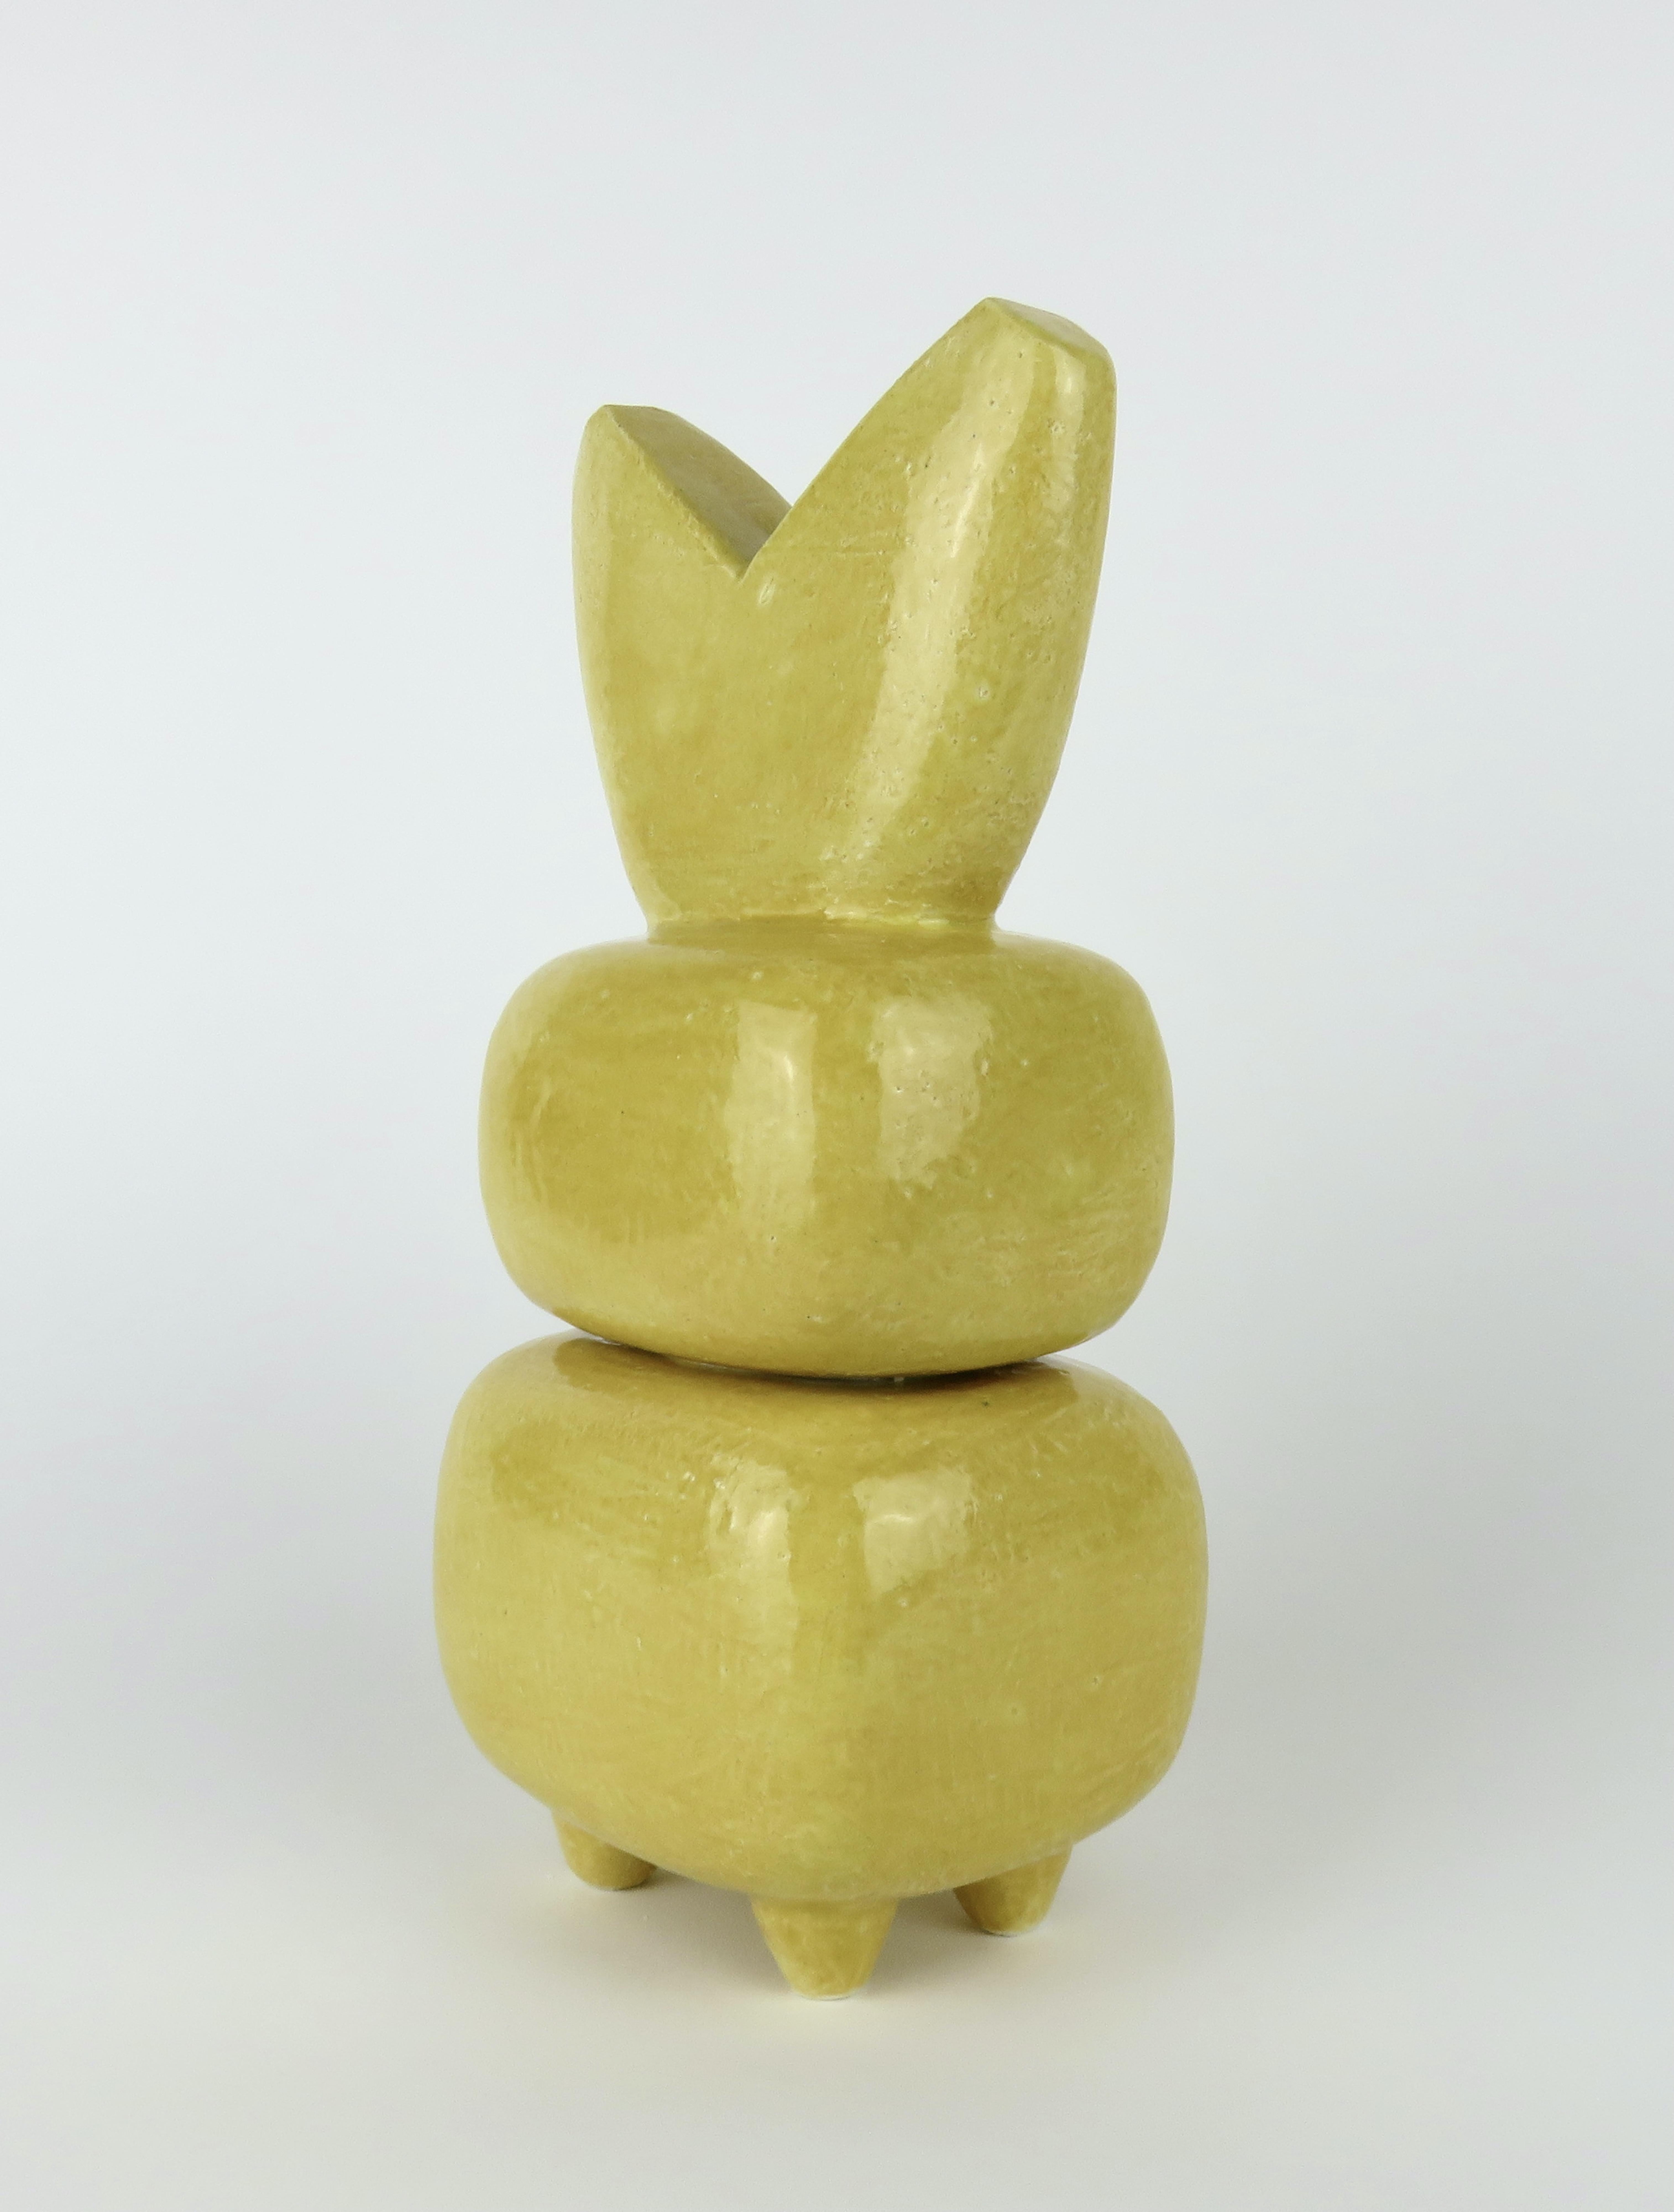 Brand new and hot out of the Kiln, this lovely straw-yellow Modern TOTEM is made of white stoneware with a light glaze application. The textures on the handbuilt forms show through the glaze. Each form or part is first made as a solid piece, then